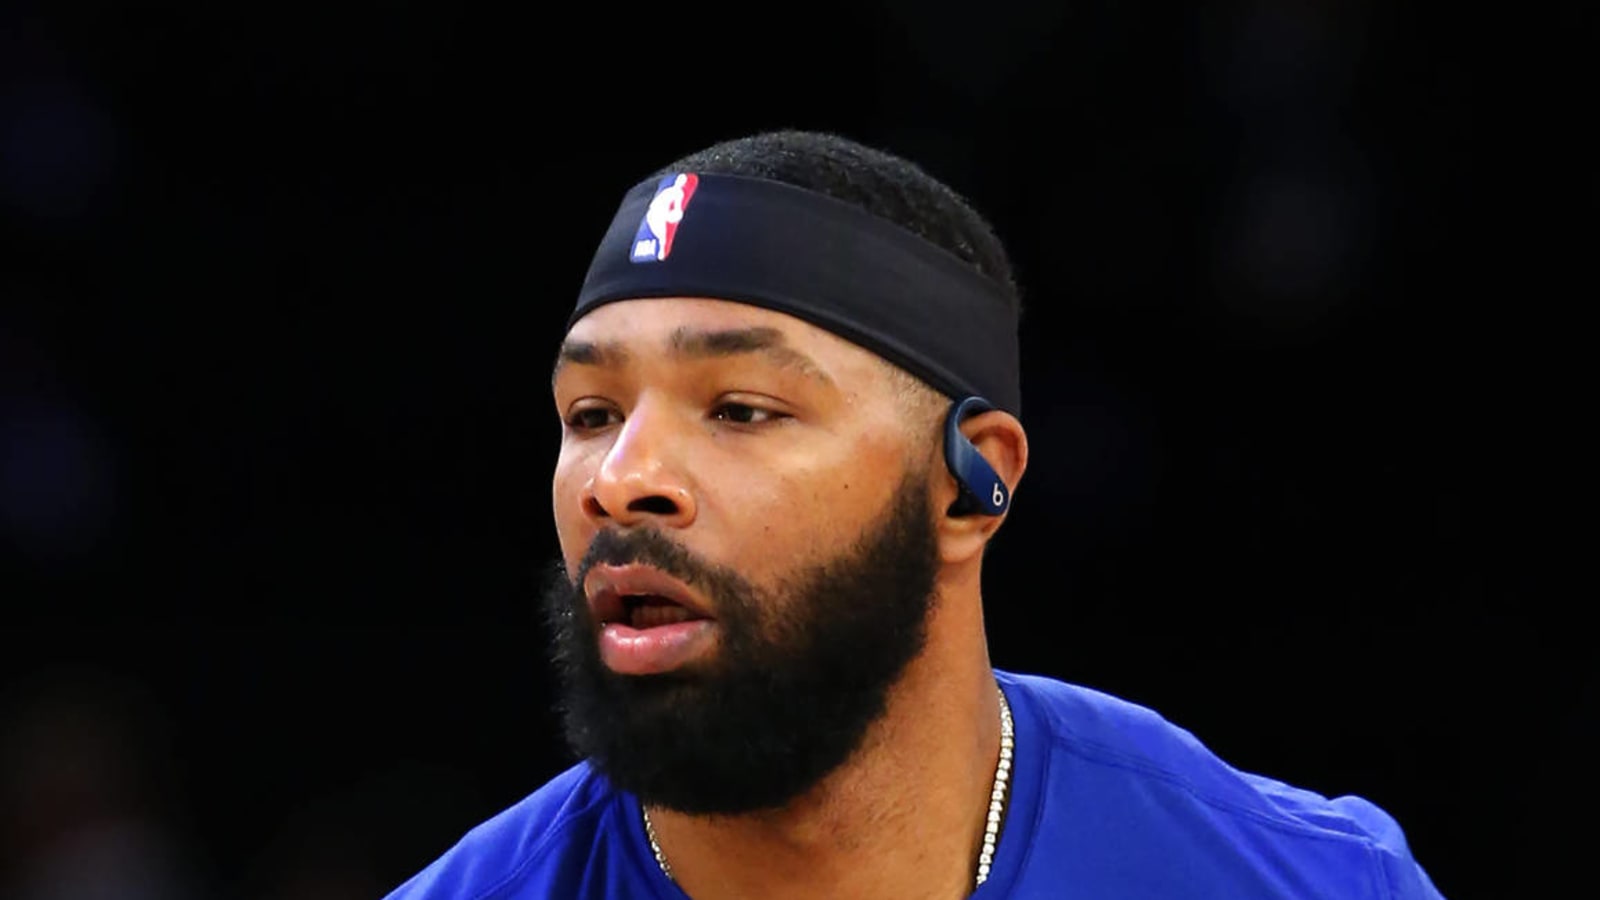 Knicks' Marcus Morris excited to face Melo, Blazers